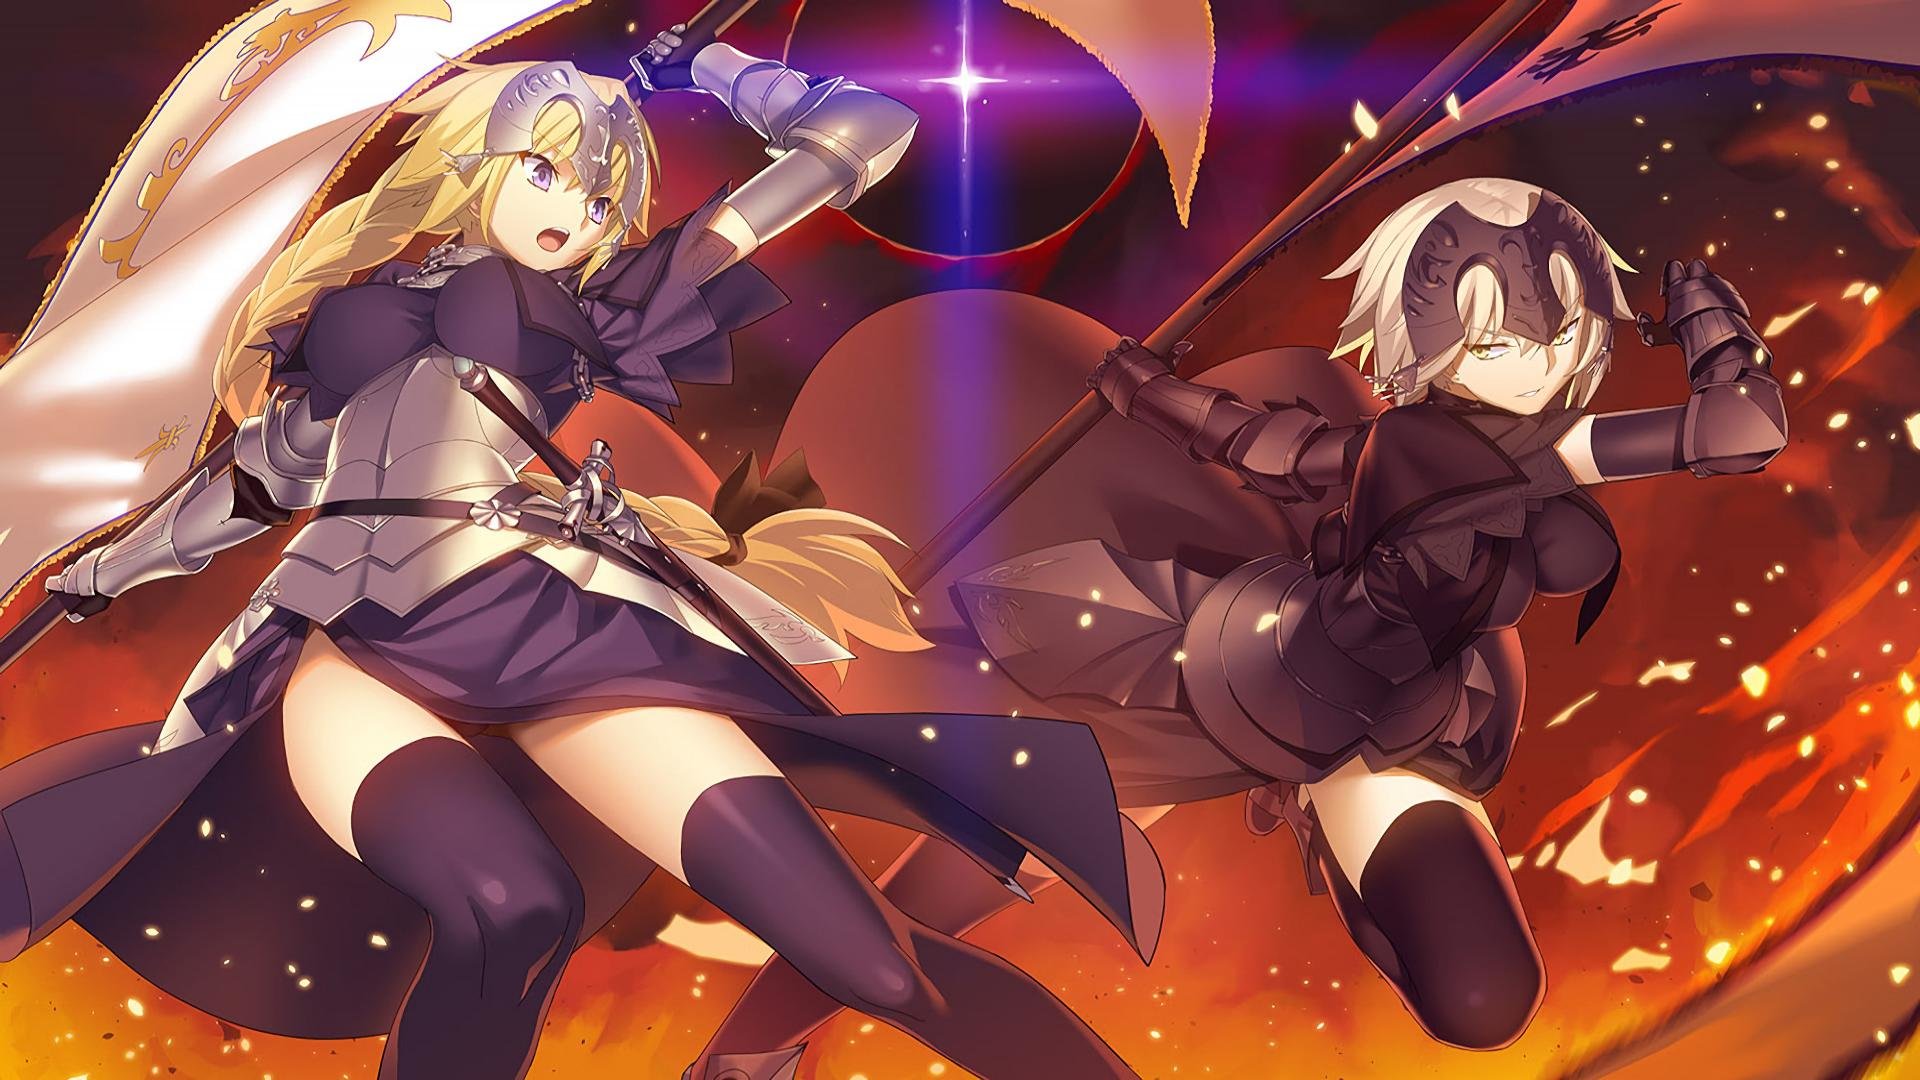 Download full hd 1920x1080 Fate/Grand Order PC background ID:330254 for free